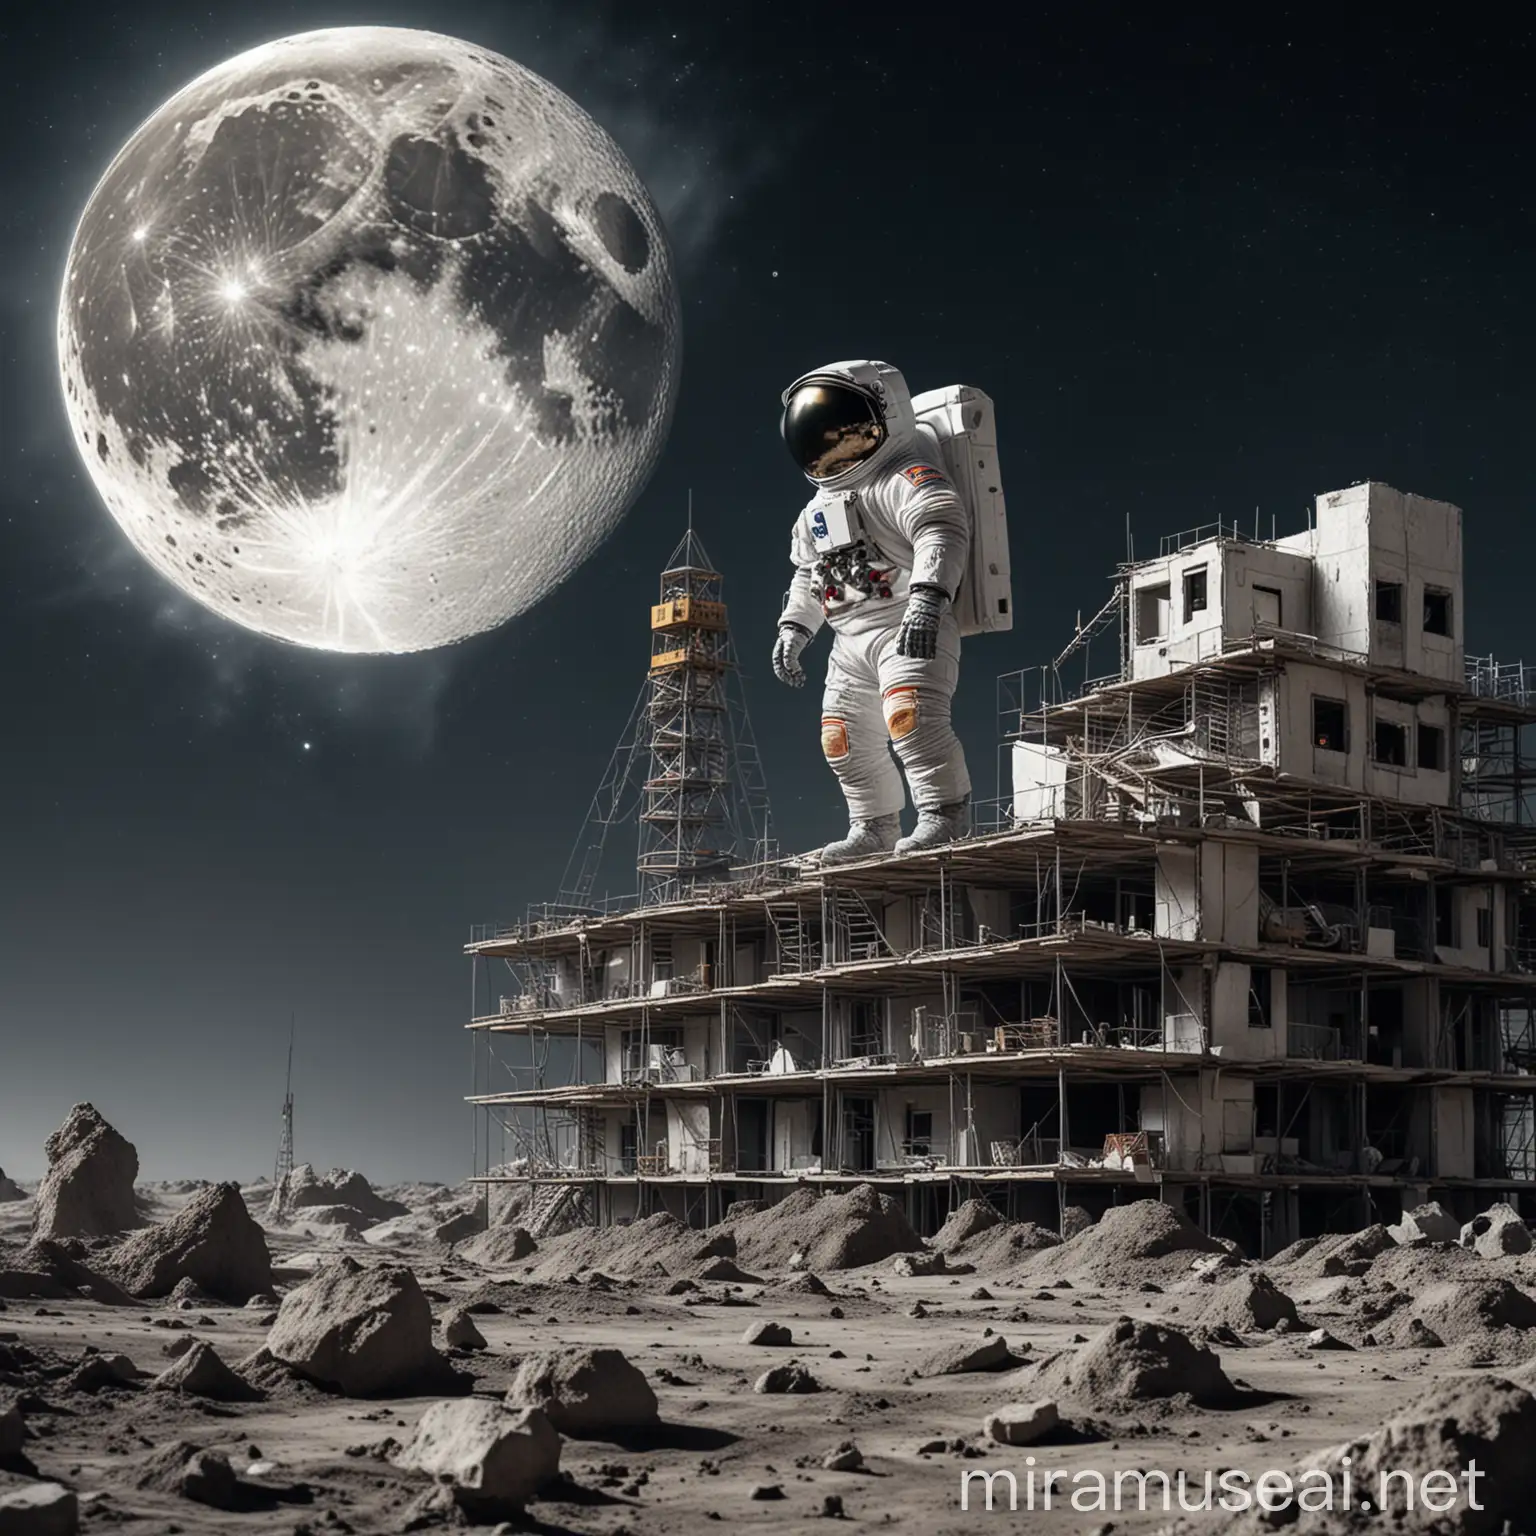 Astronaut Building MultiStorey House on Moons Surface